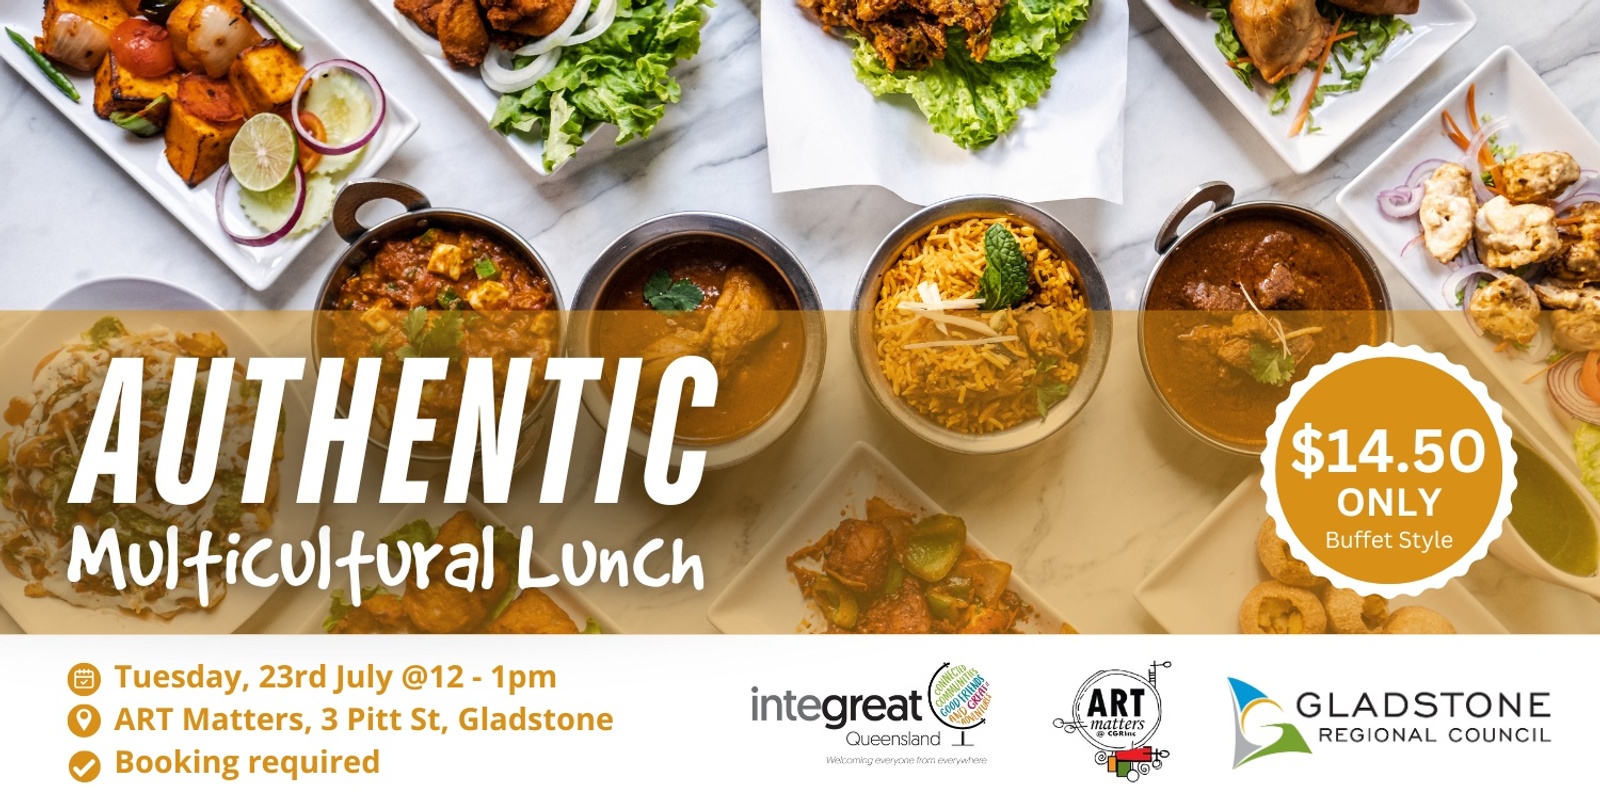 Banner image for Authentic Multicultural Lunch